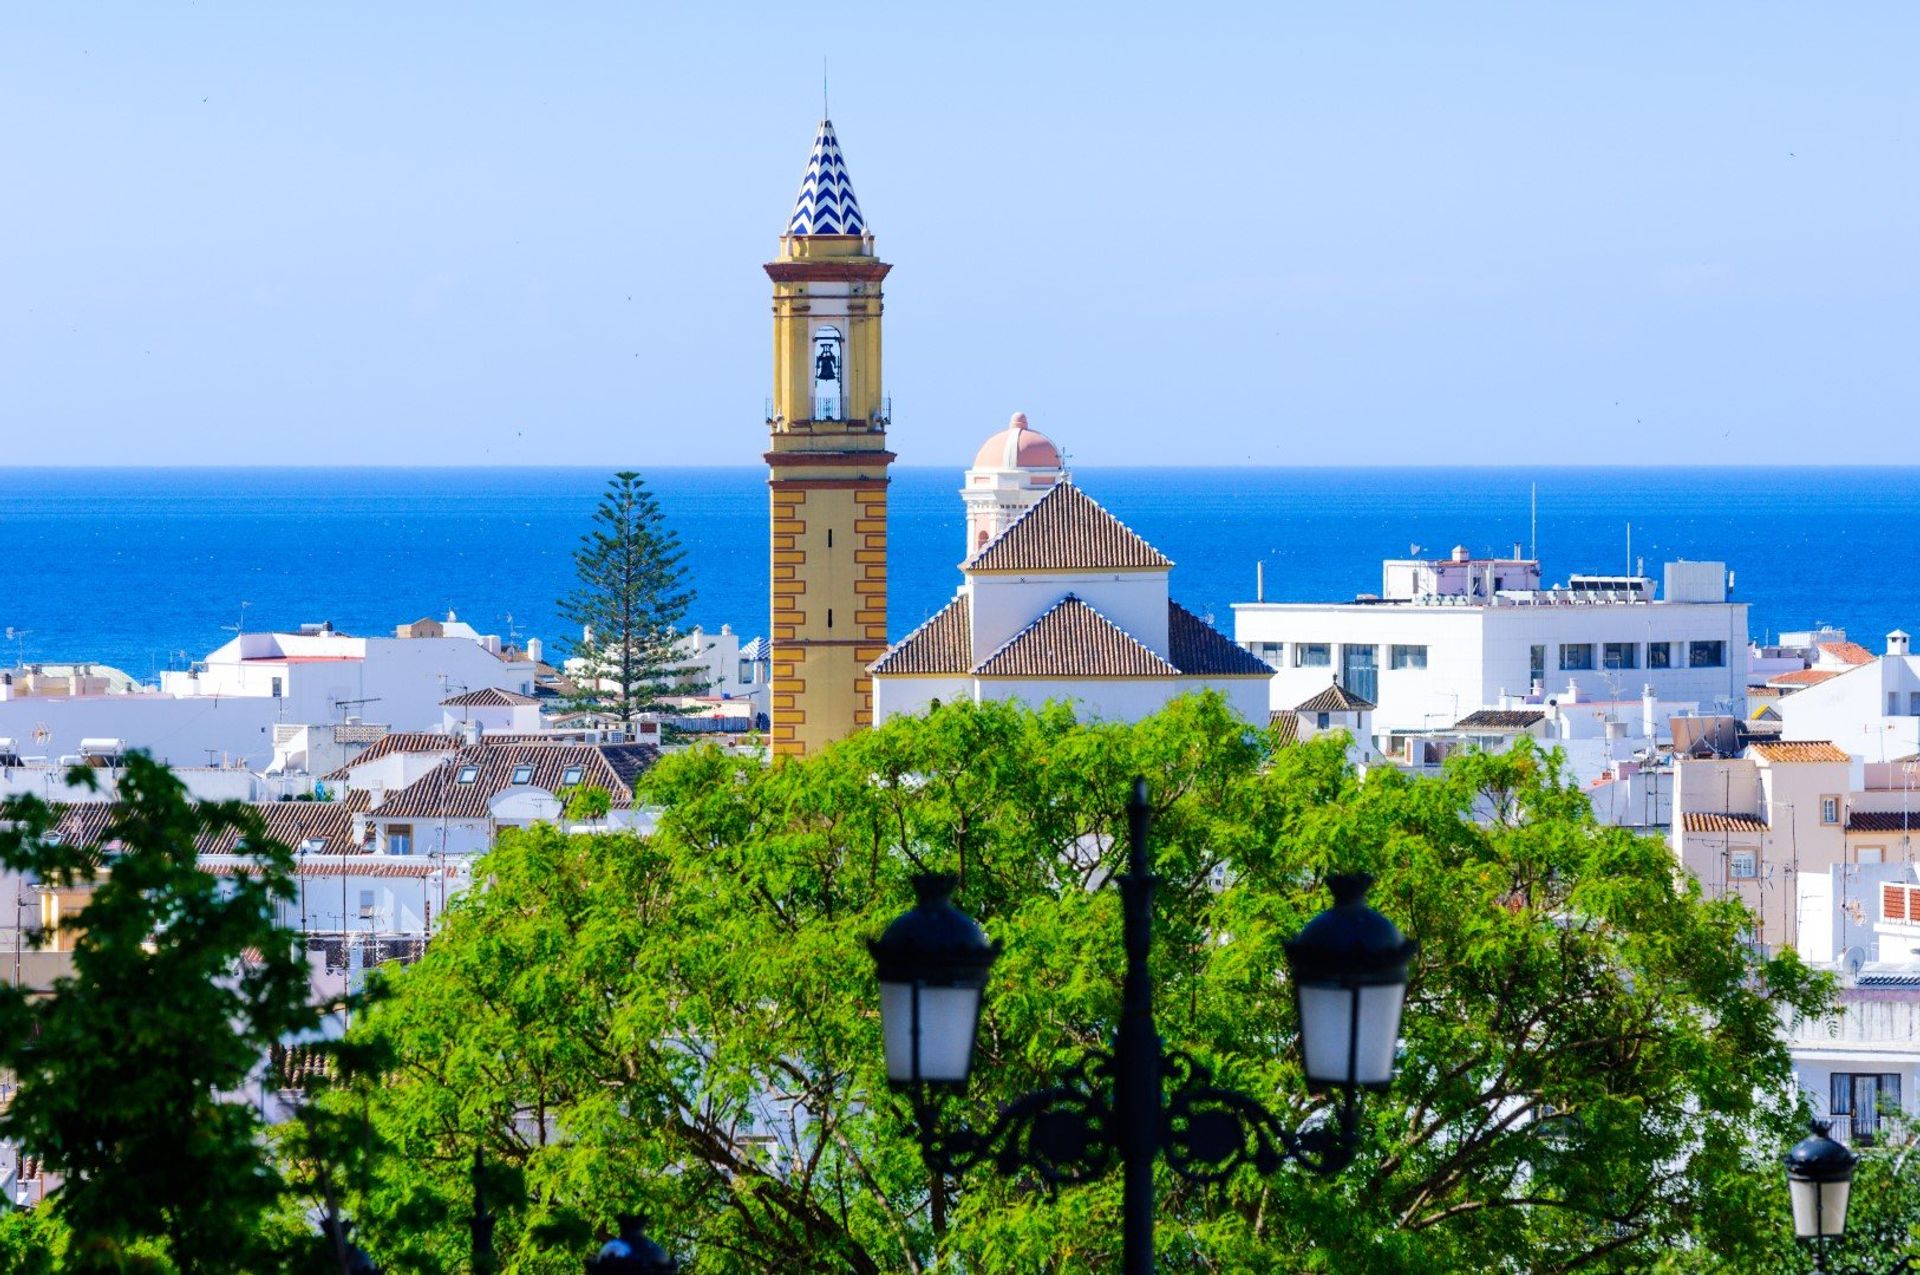 Estepona's ancient clock tower is the oldest ecclesiastical building on the Costa del Sol, rising above Flower Square in the old town